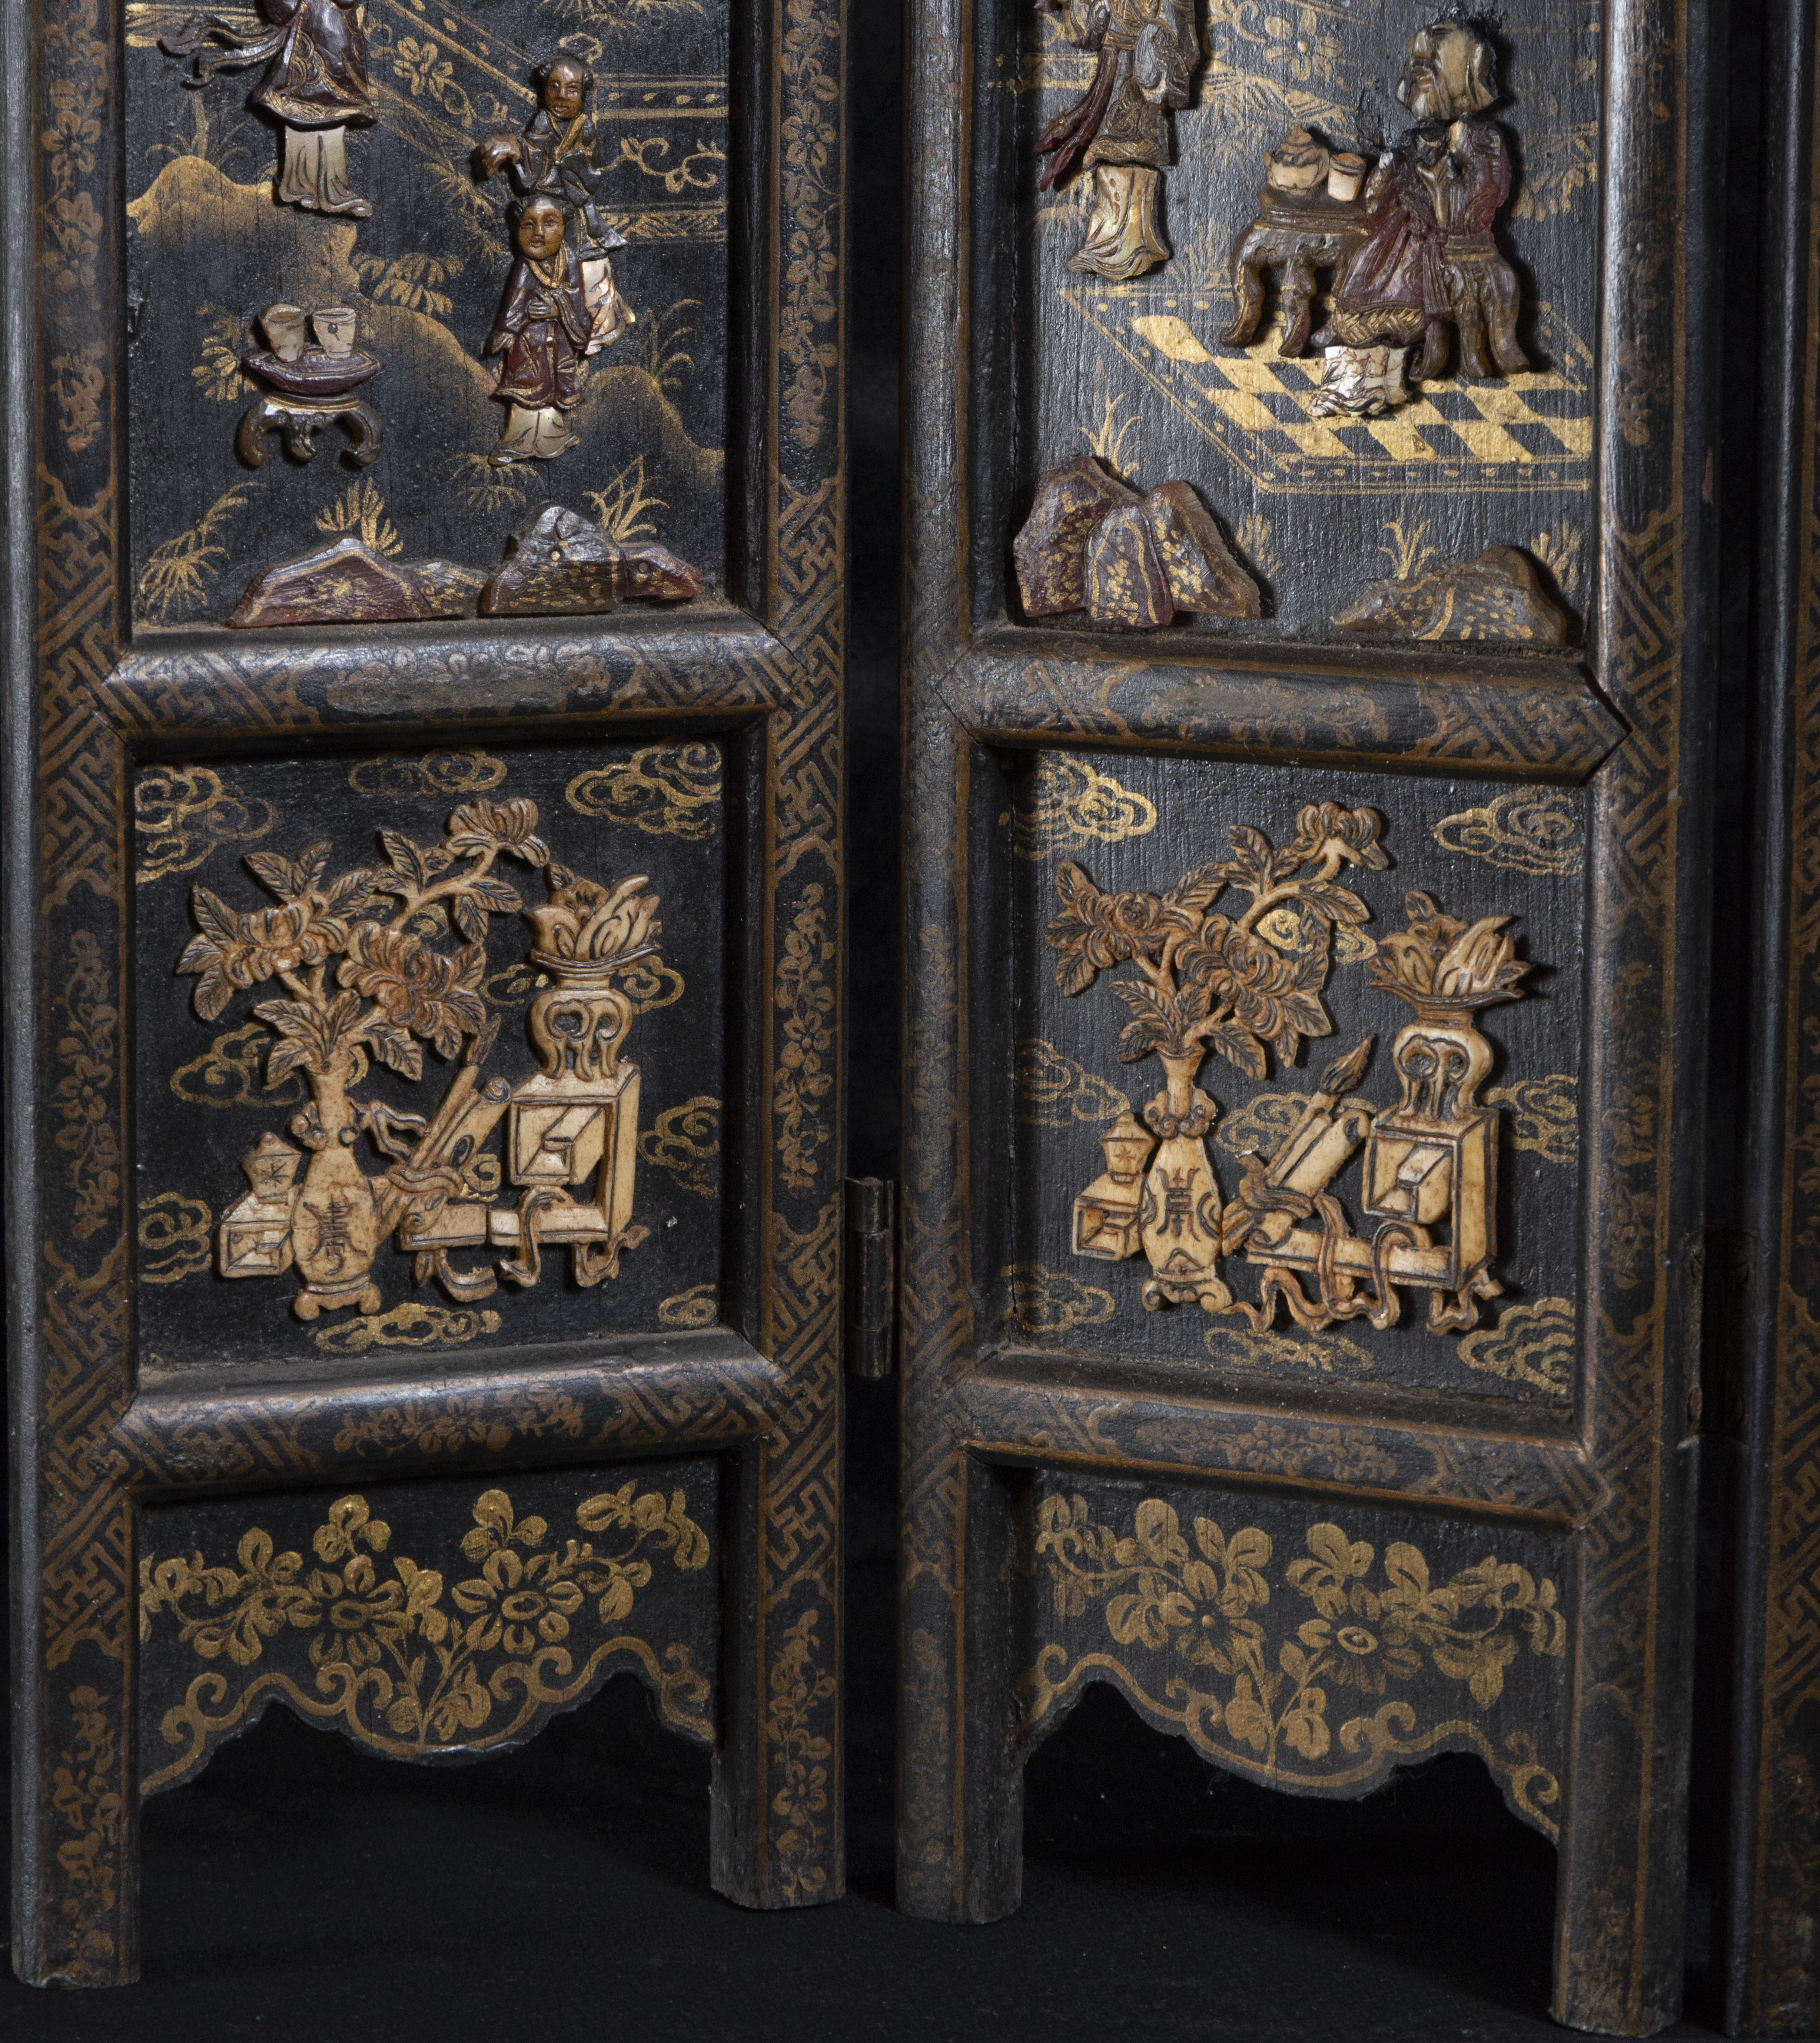 Elegant Chinese screen with court scenes in relief, 19th century - Image 3 of 5